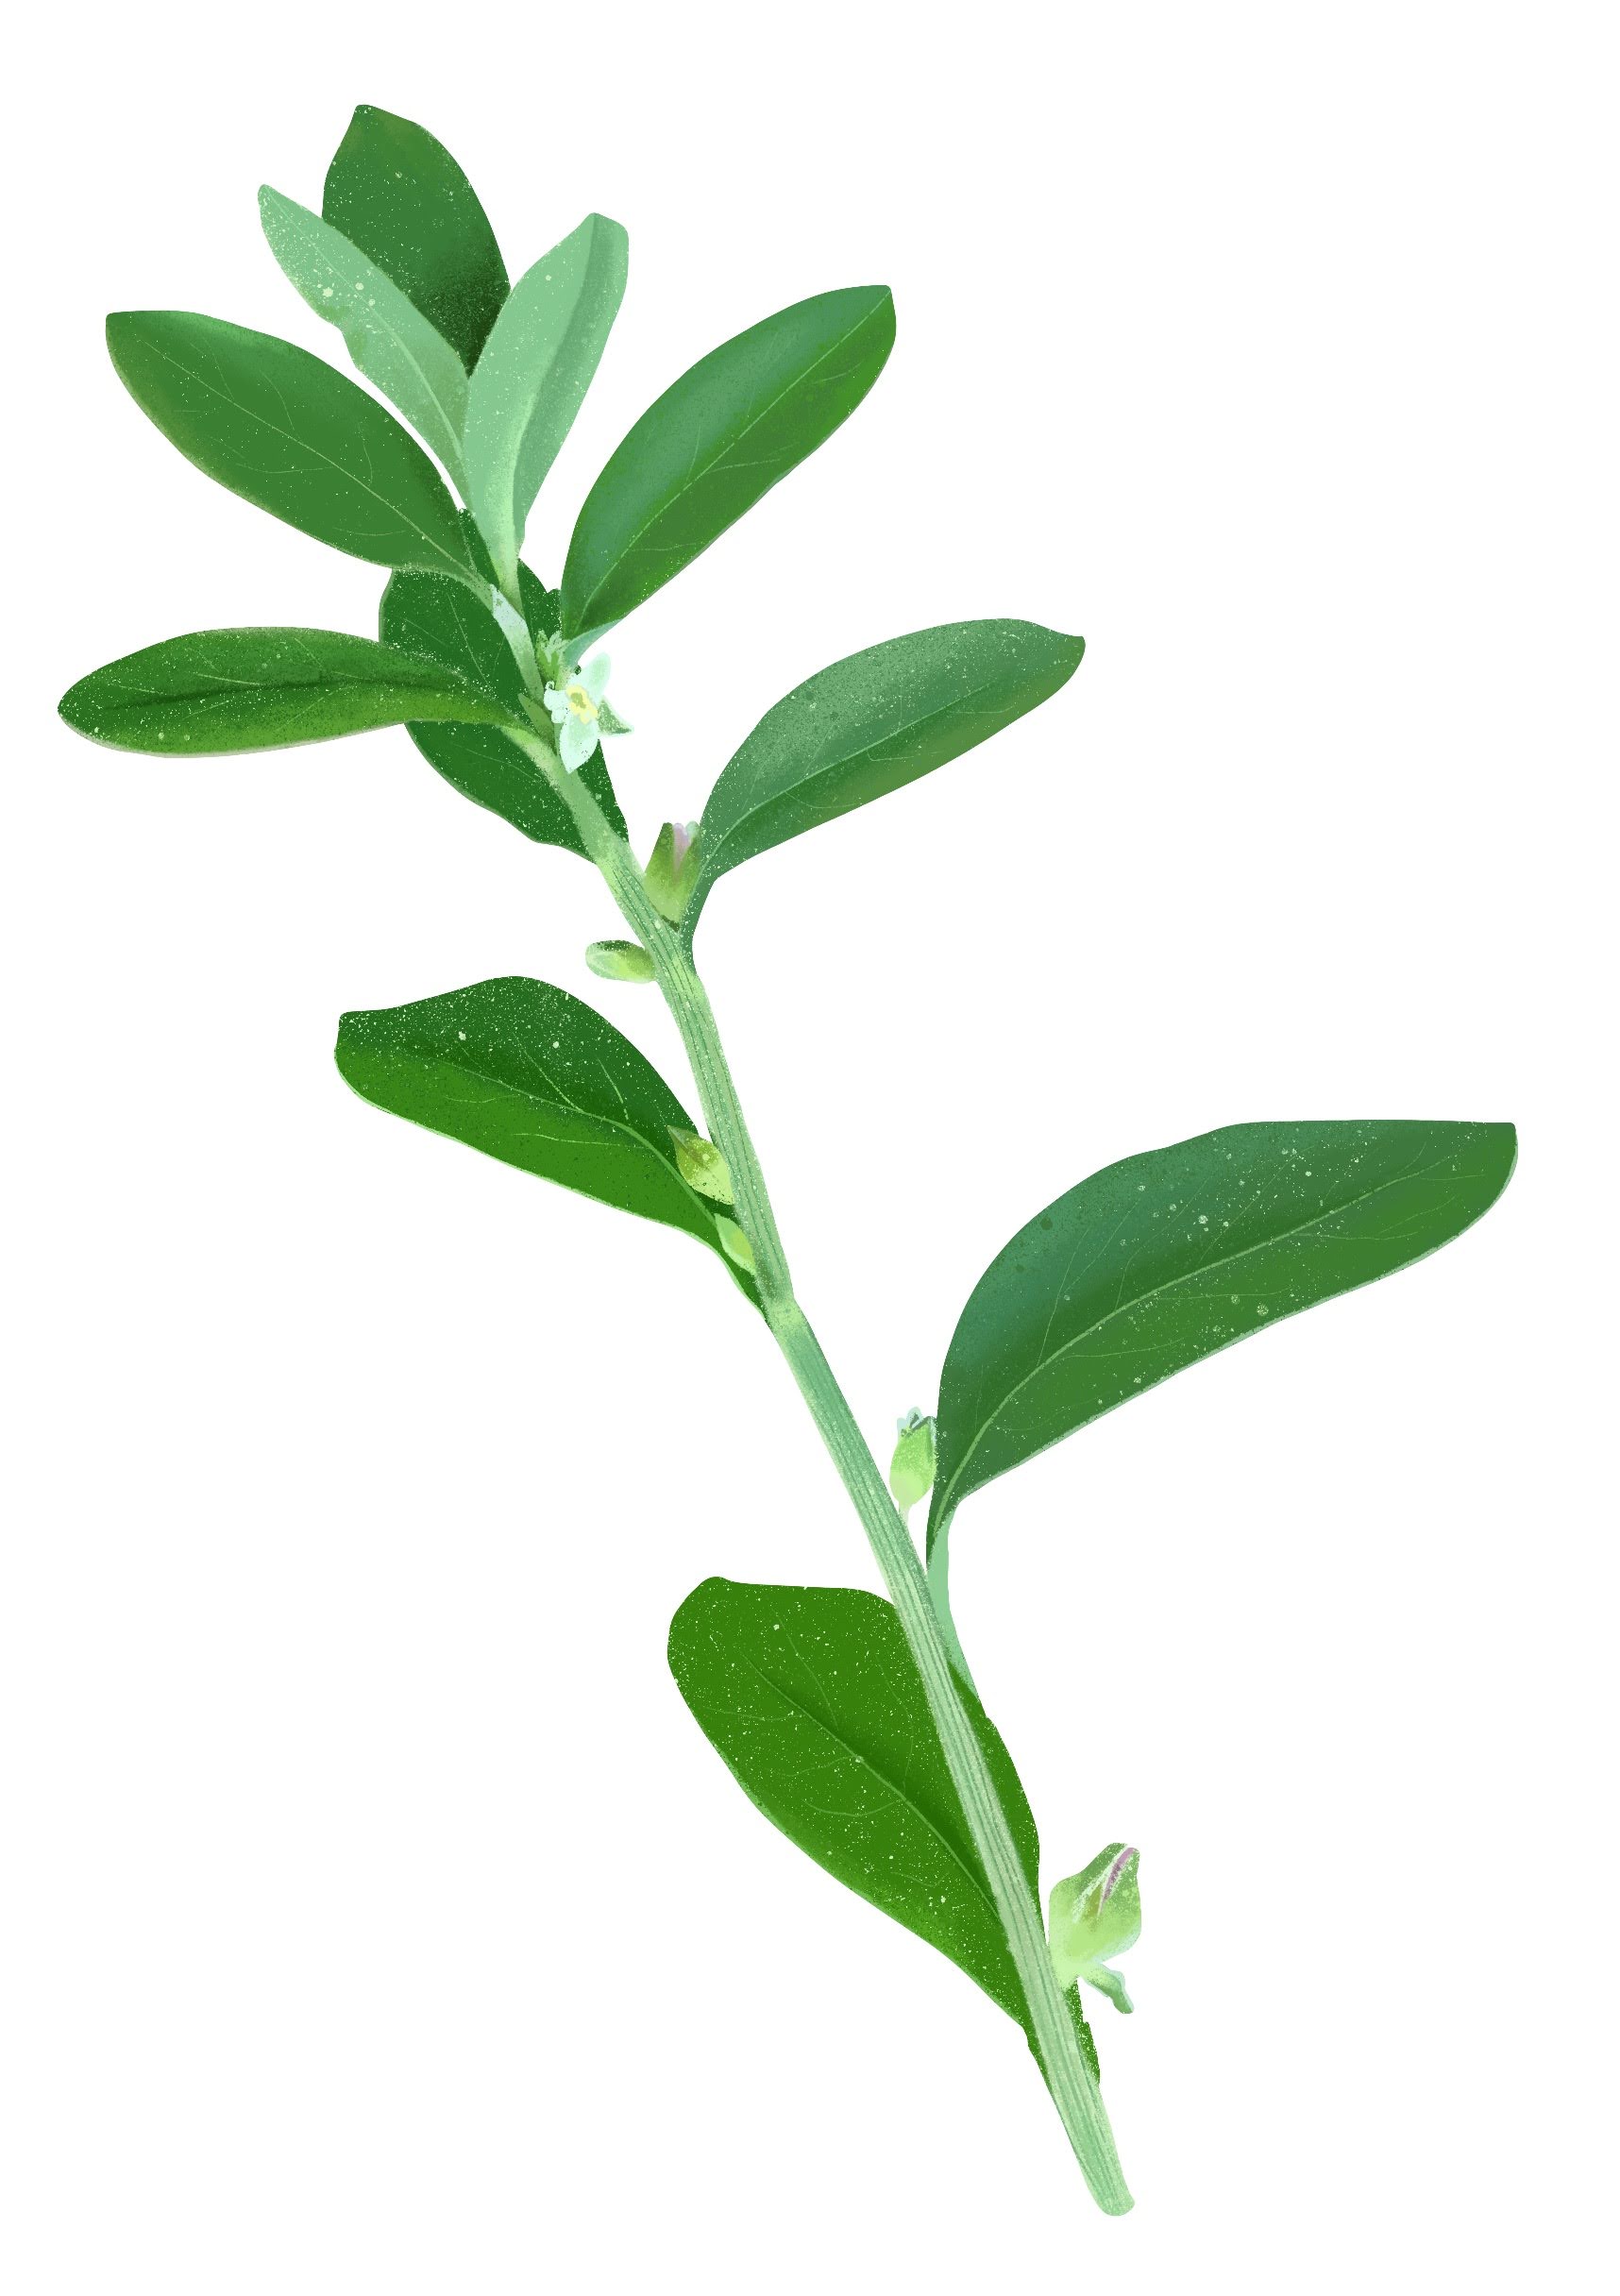 Drawing of plant stem with green leaves.